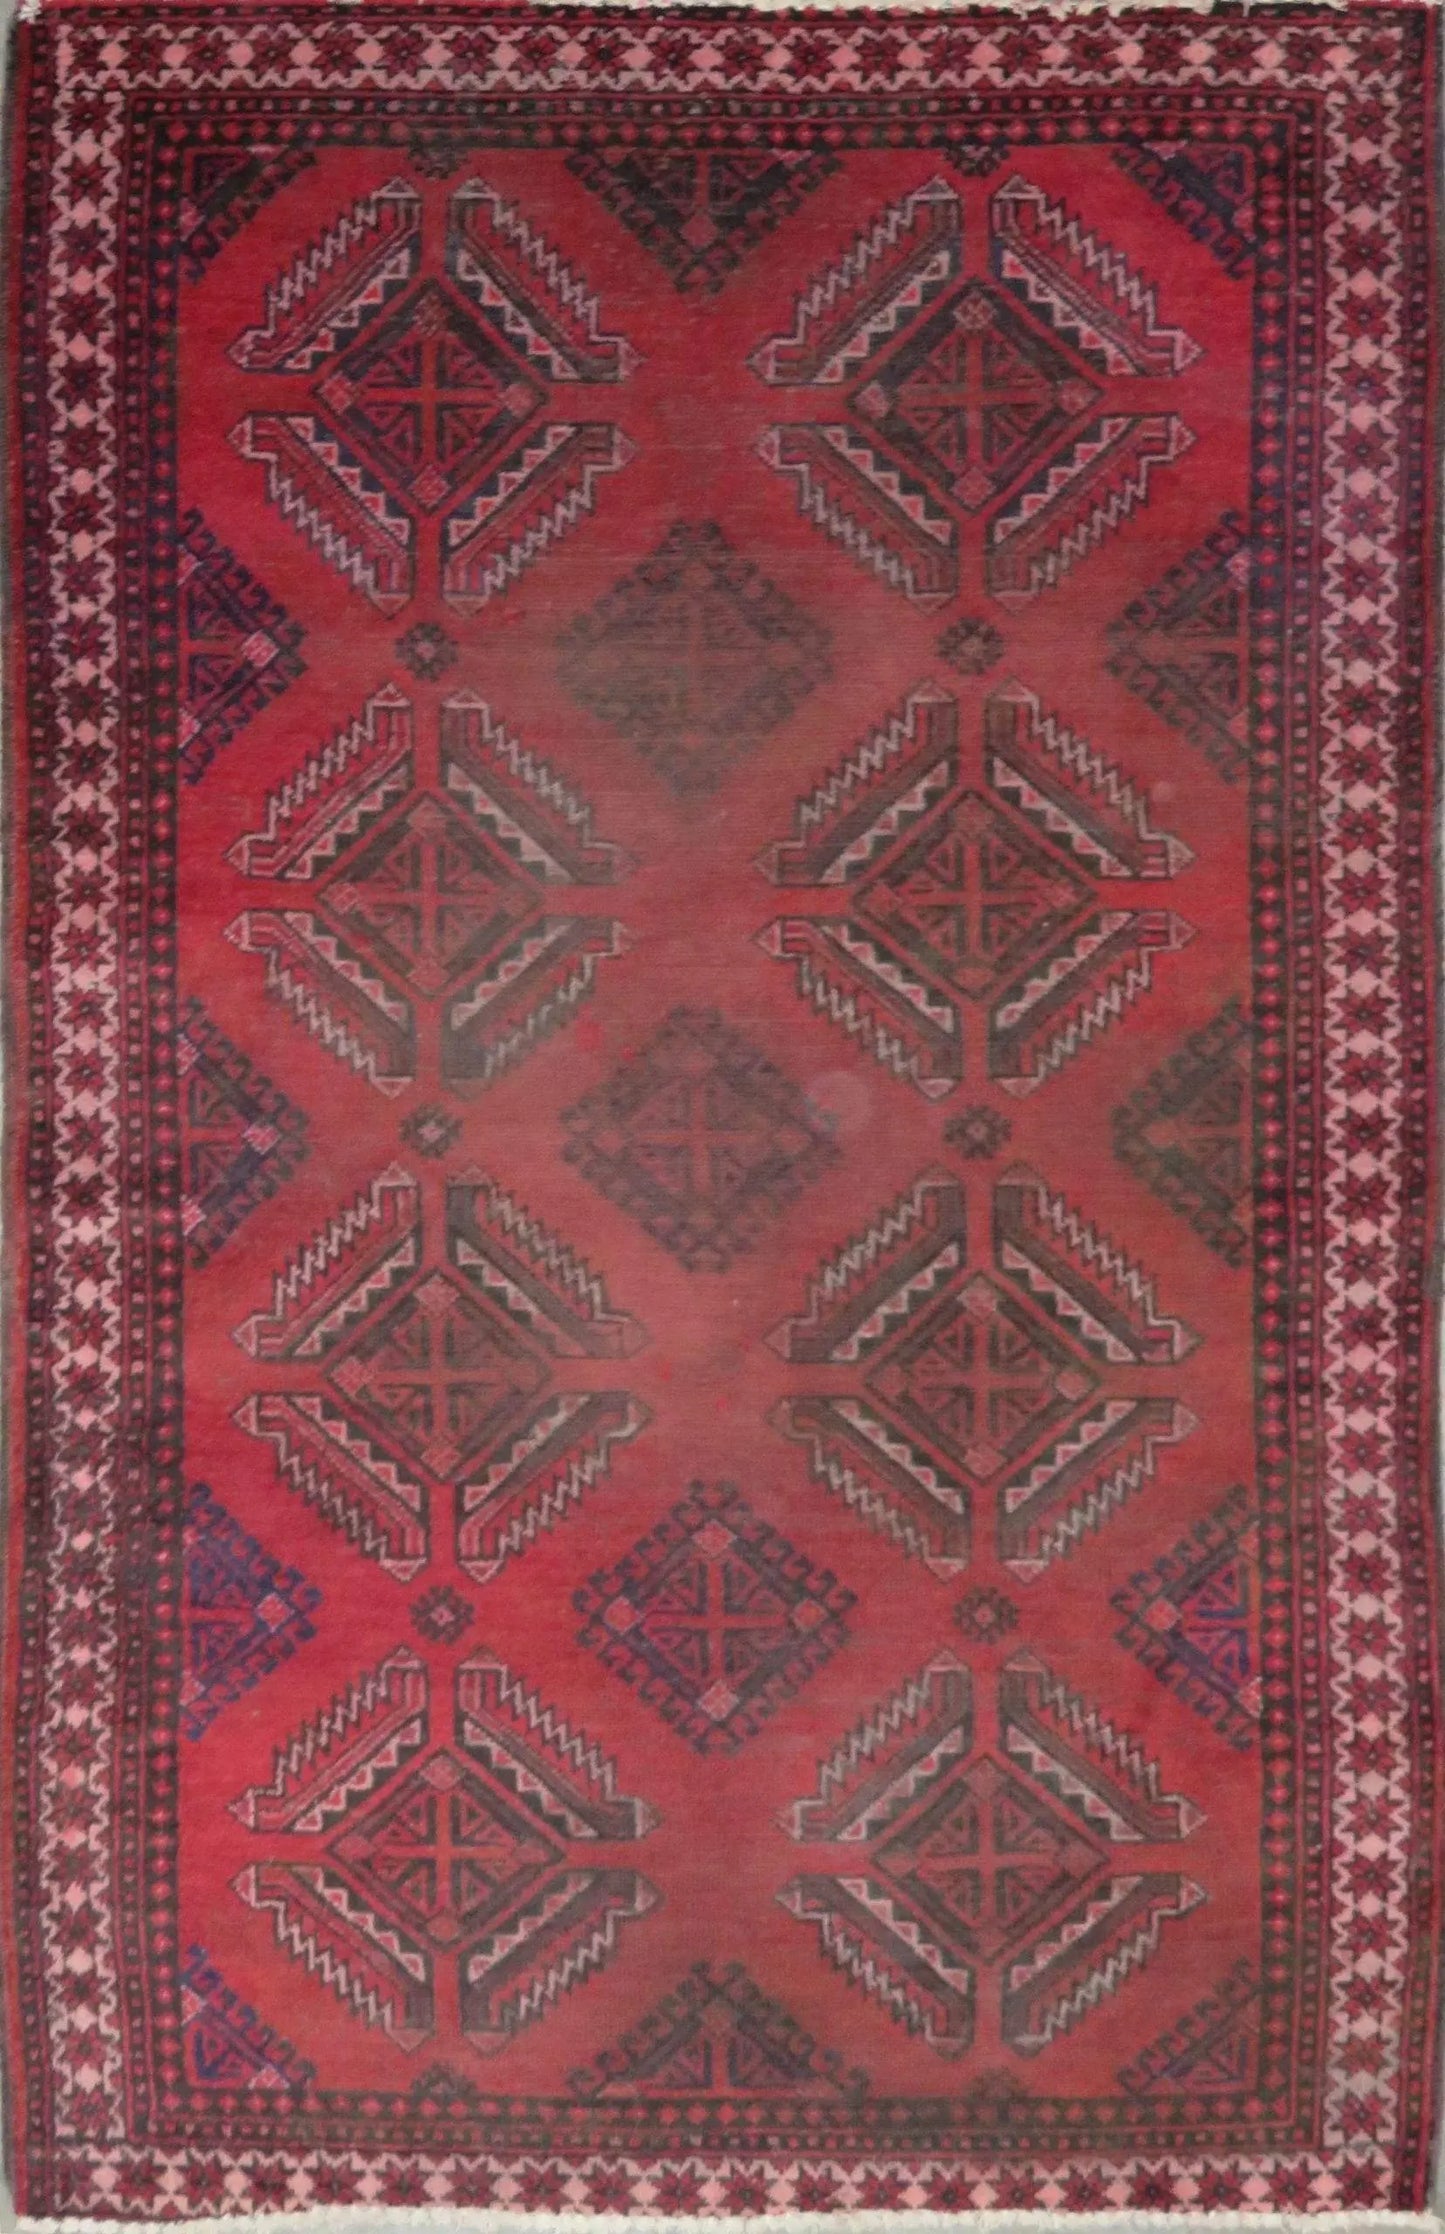 Hand-Knotted Vintage Rug 6'2" x 3'9"